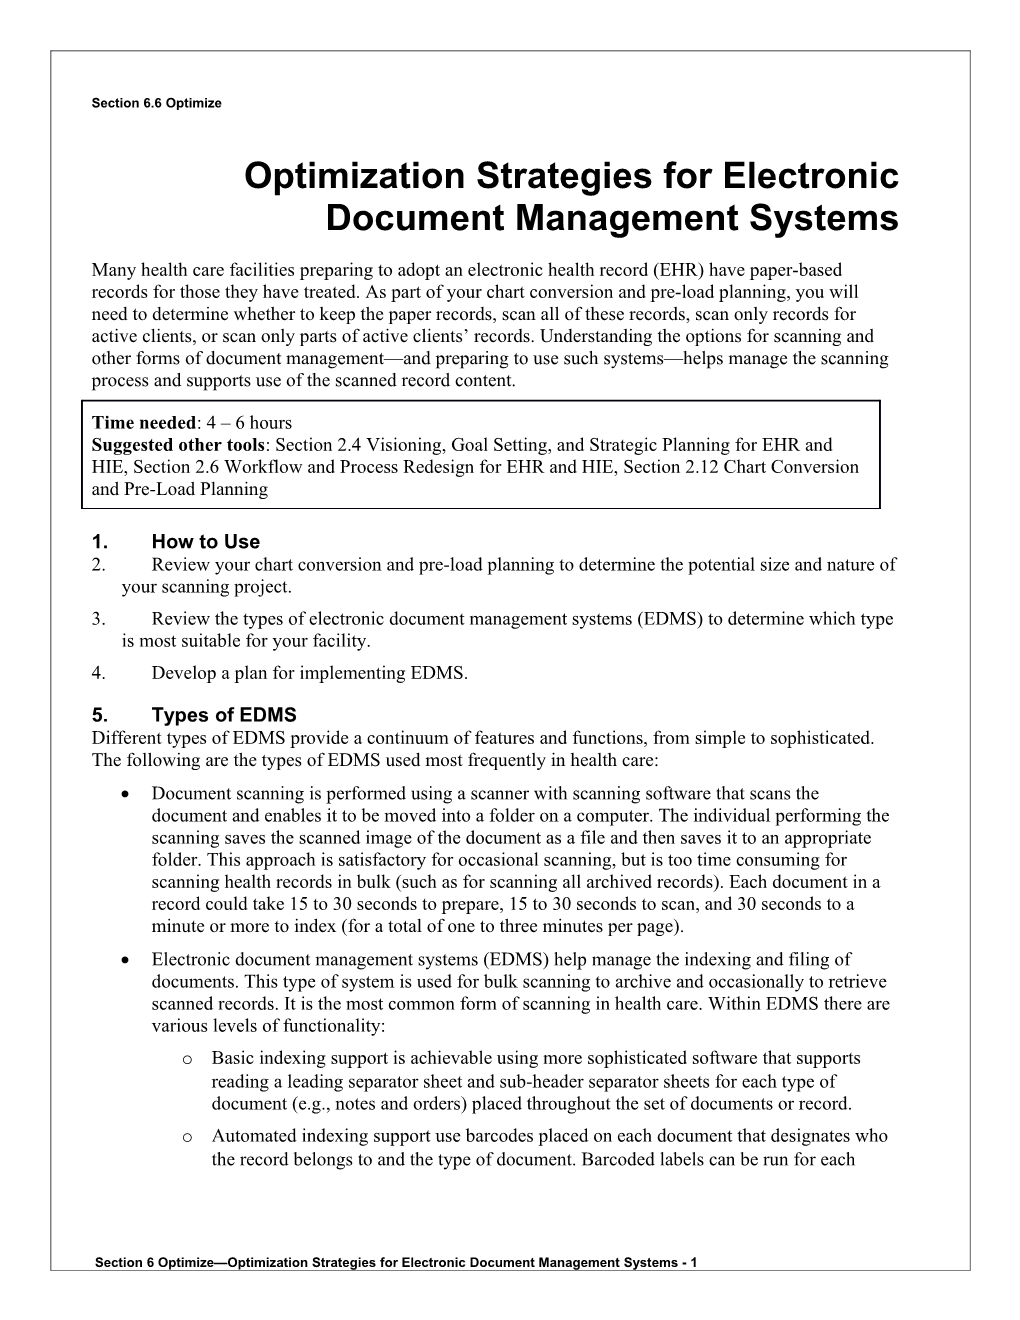 6 Optimization Strategies for Electronic Document Mangement Systems